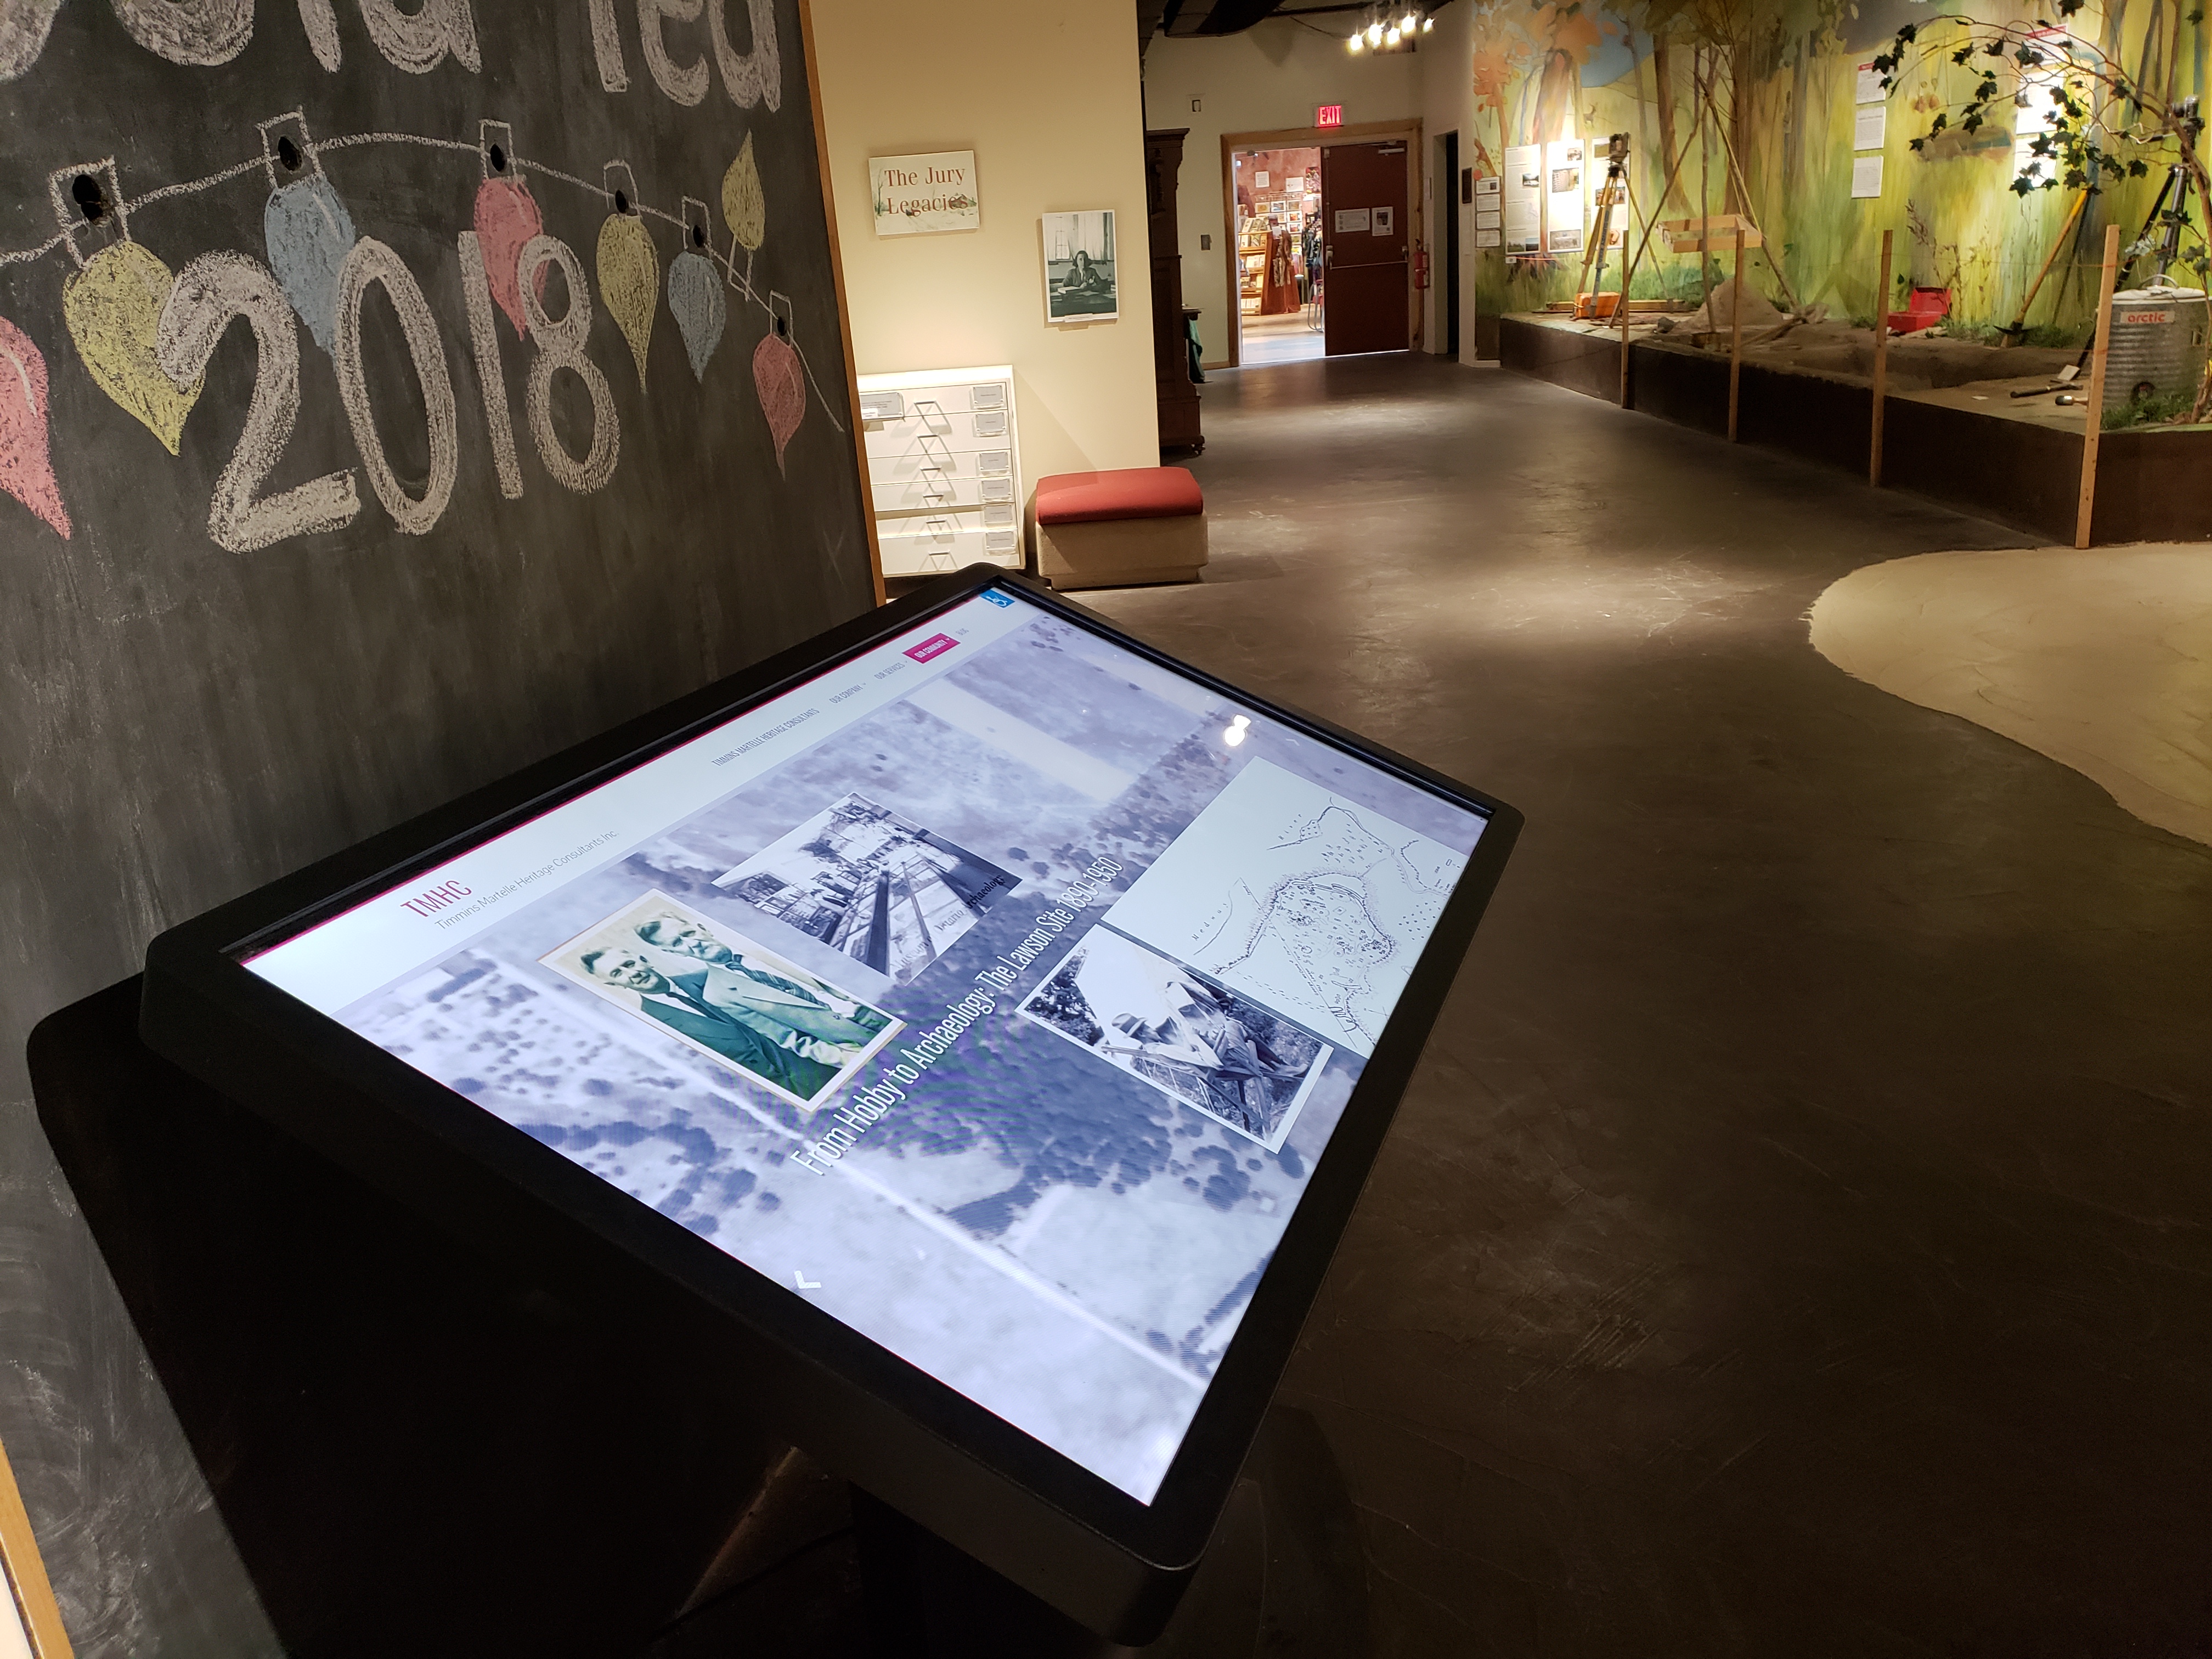 The Lawson Exhibit on display on a large touchscreen in the Museum of Ontario Archaeology gallery